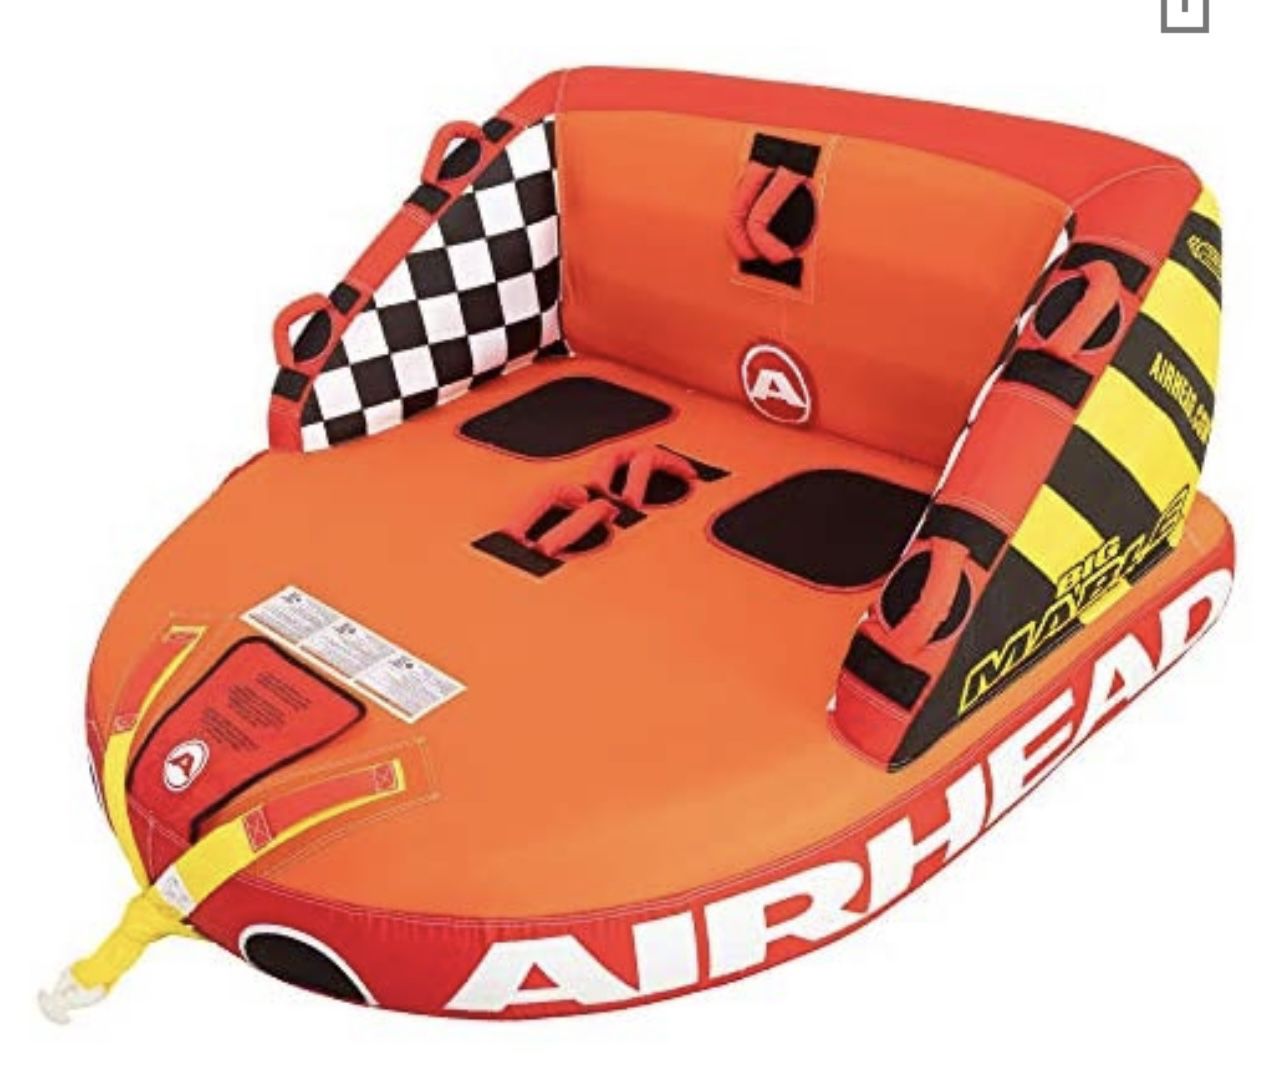 Airhead Great Big Mable | 1-2 Rider Towable Tube for Boating, Orange, Red, Yellow